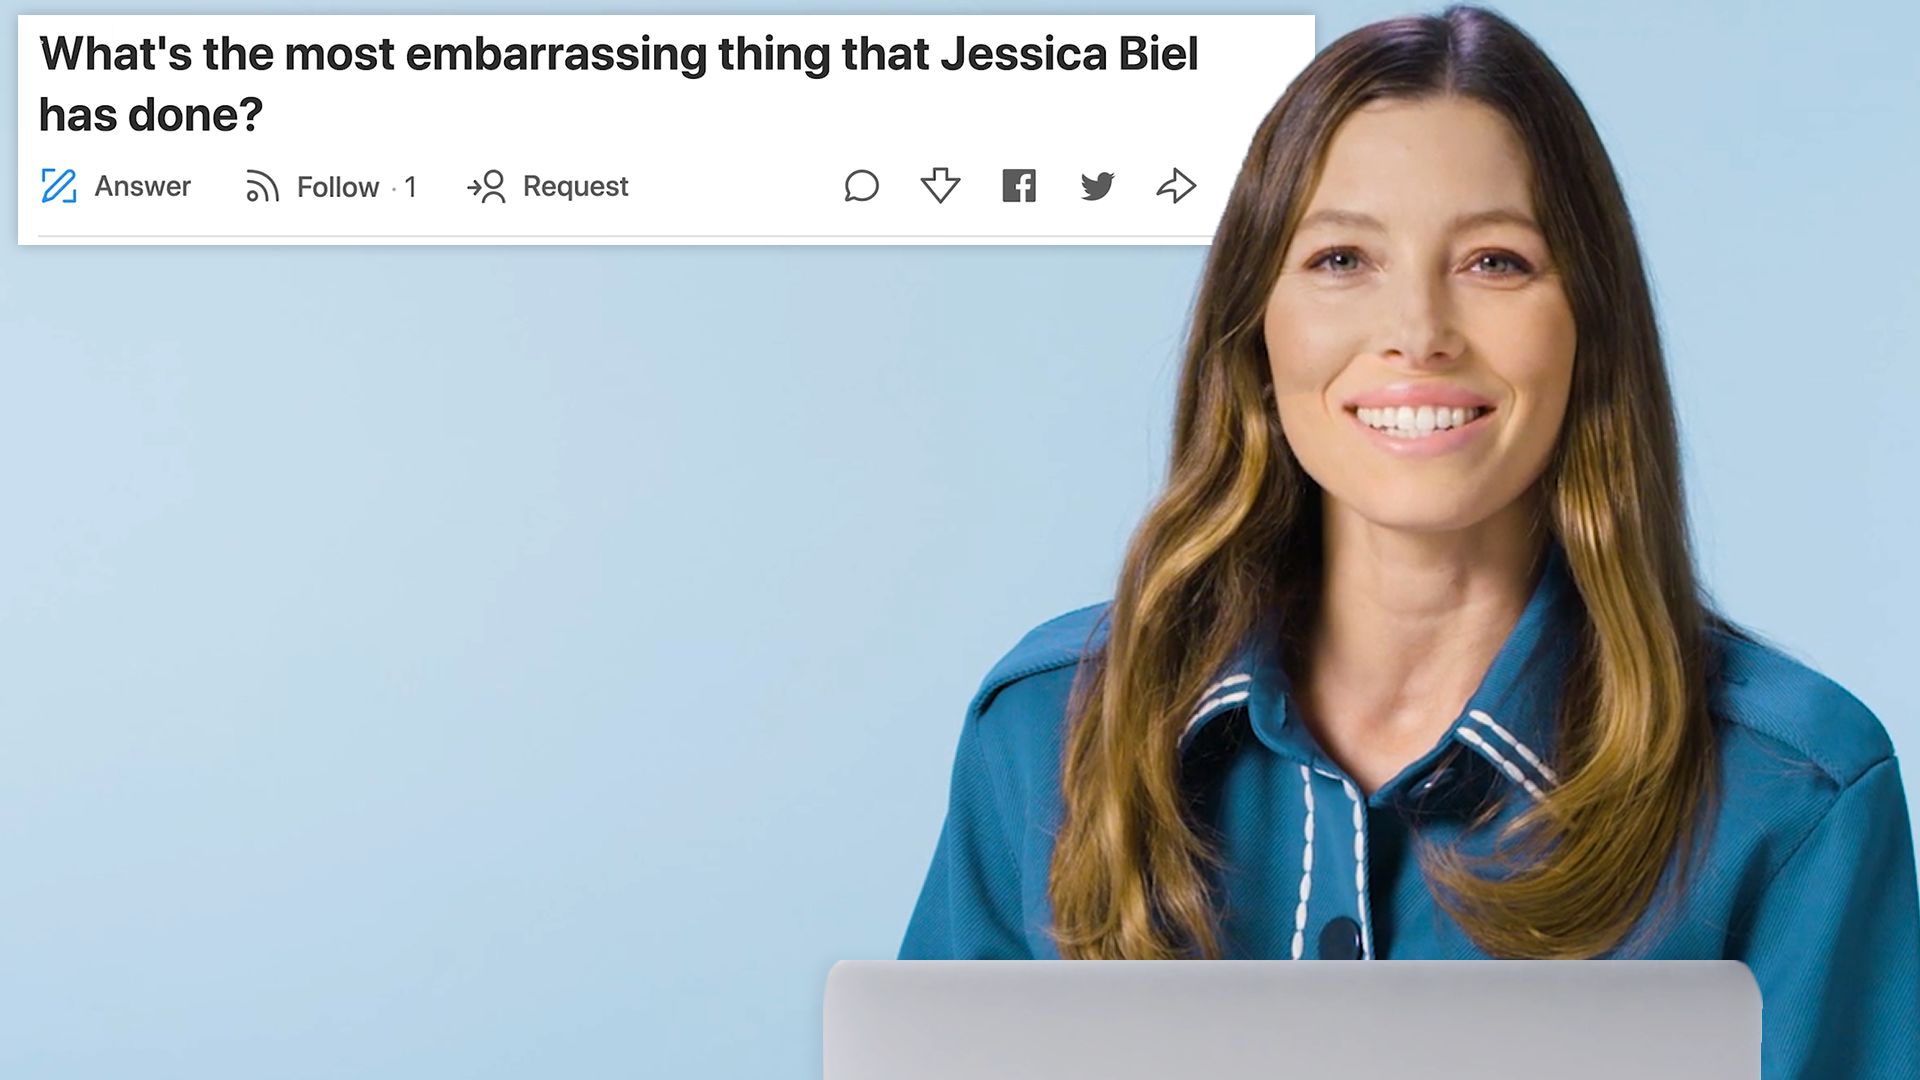 Jessica Biel on X: Before @Gaiam, I'd wrestle my way outta a sports bra  and seriously contemplate setting it on fire after a work out. But this one  is comfy and doesn't